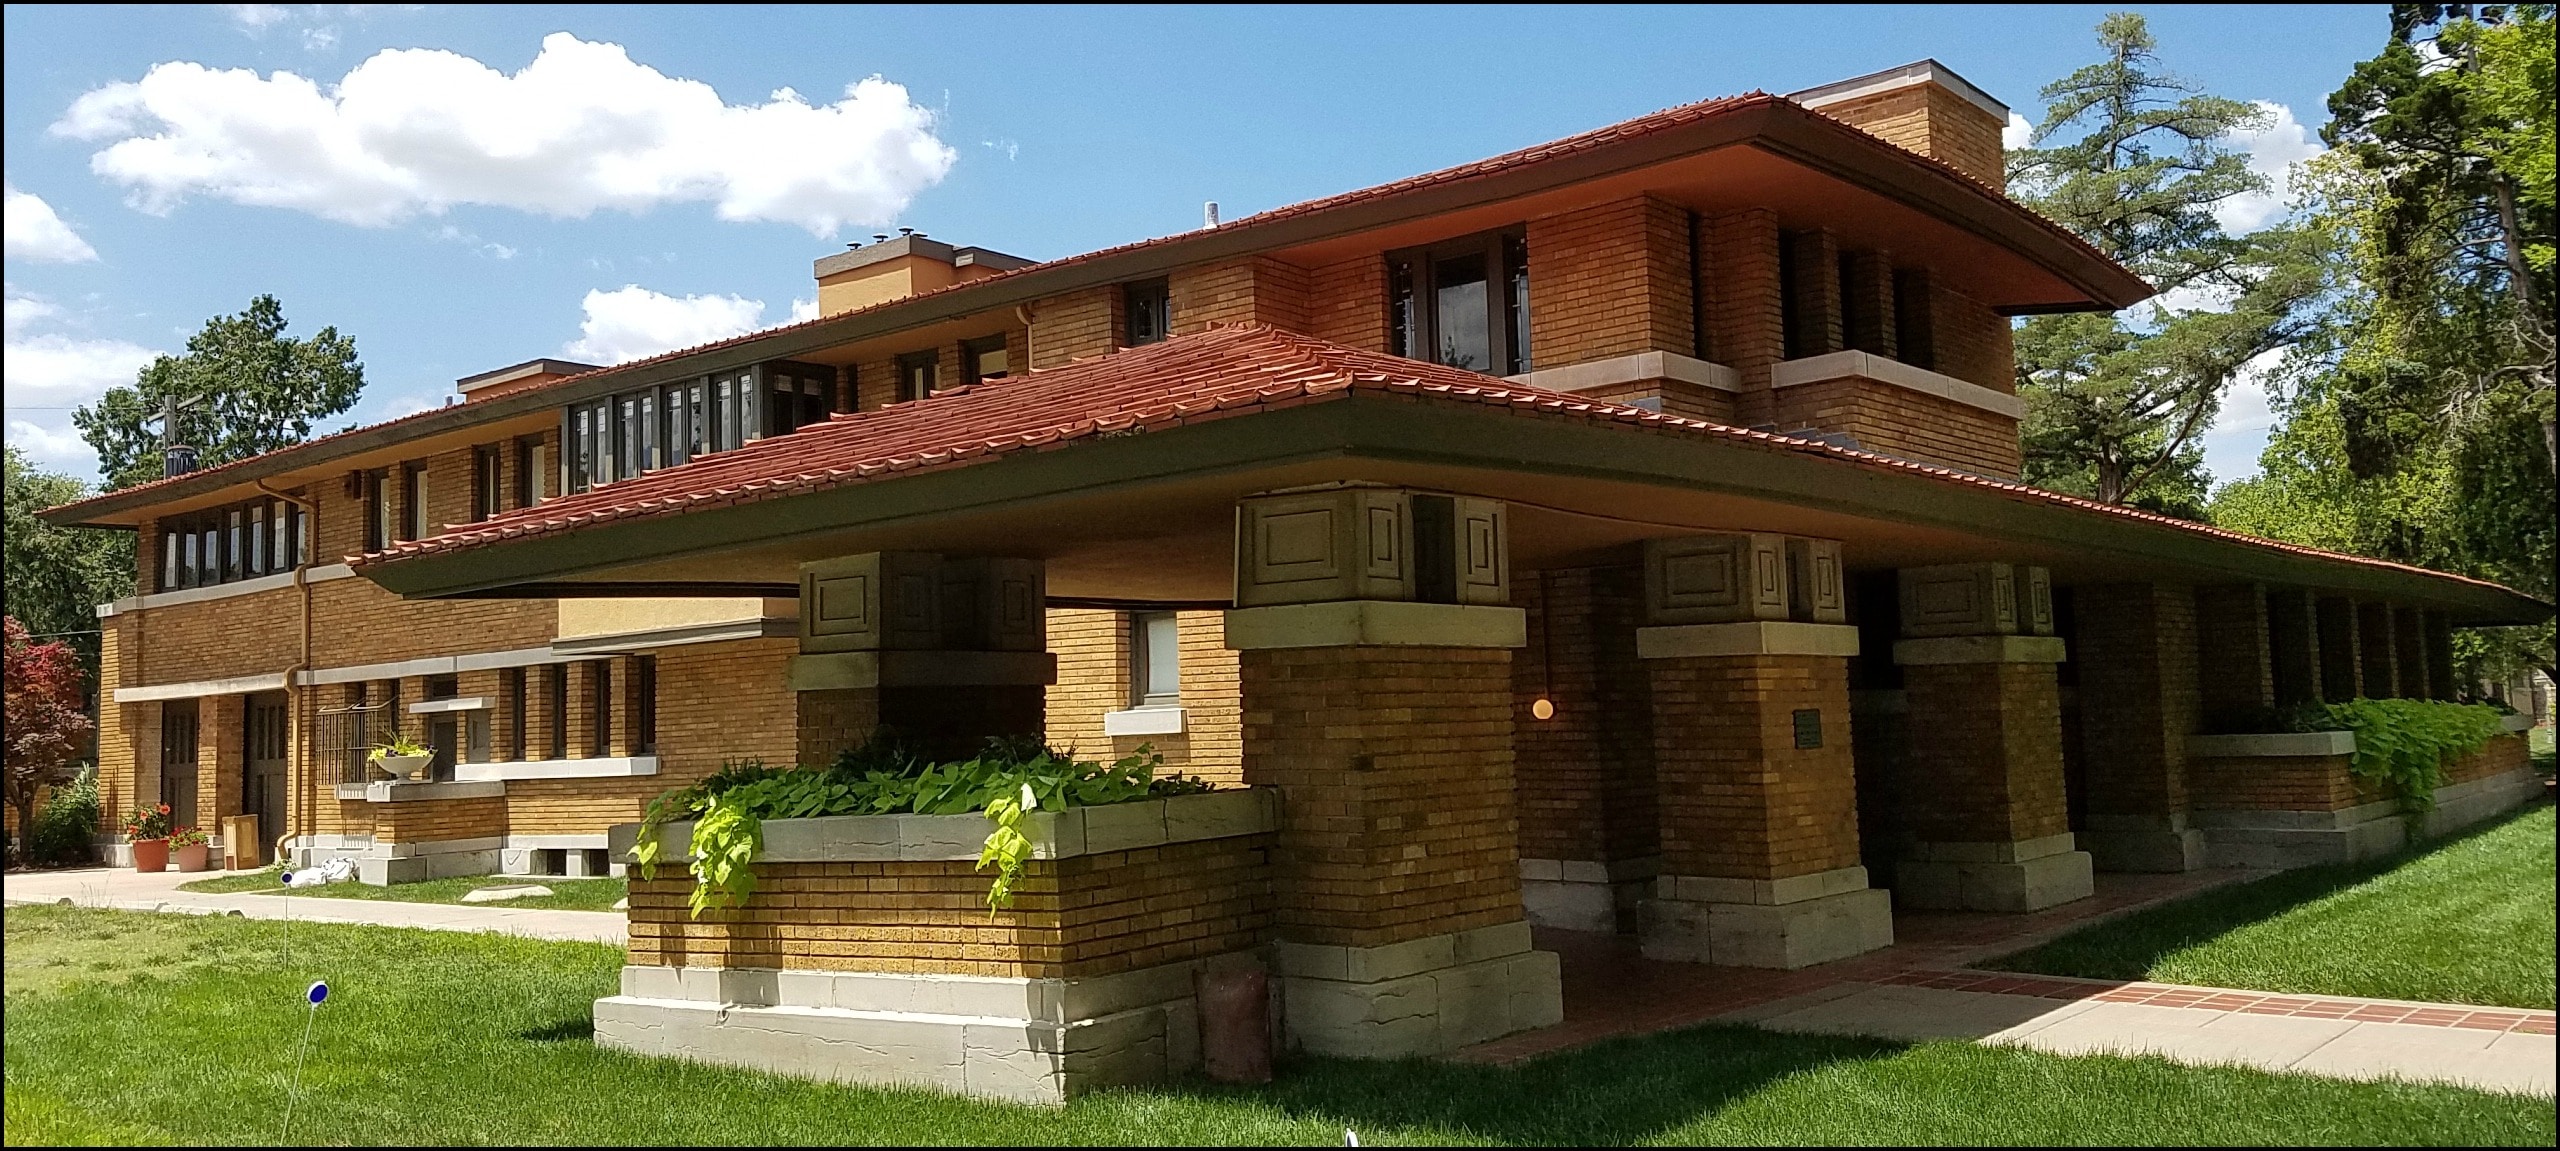 Summer Brings Frank Lloyd Wright Into My Midwest Road ...